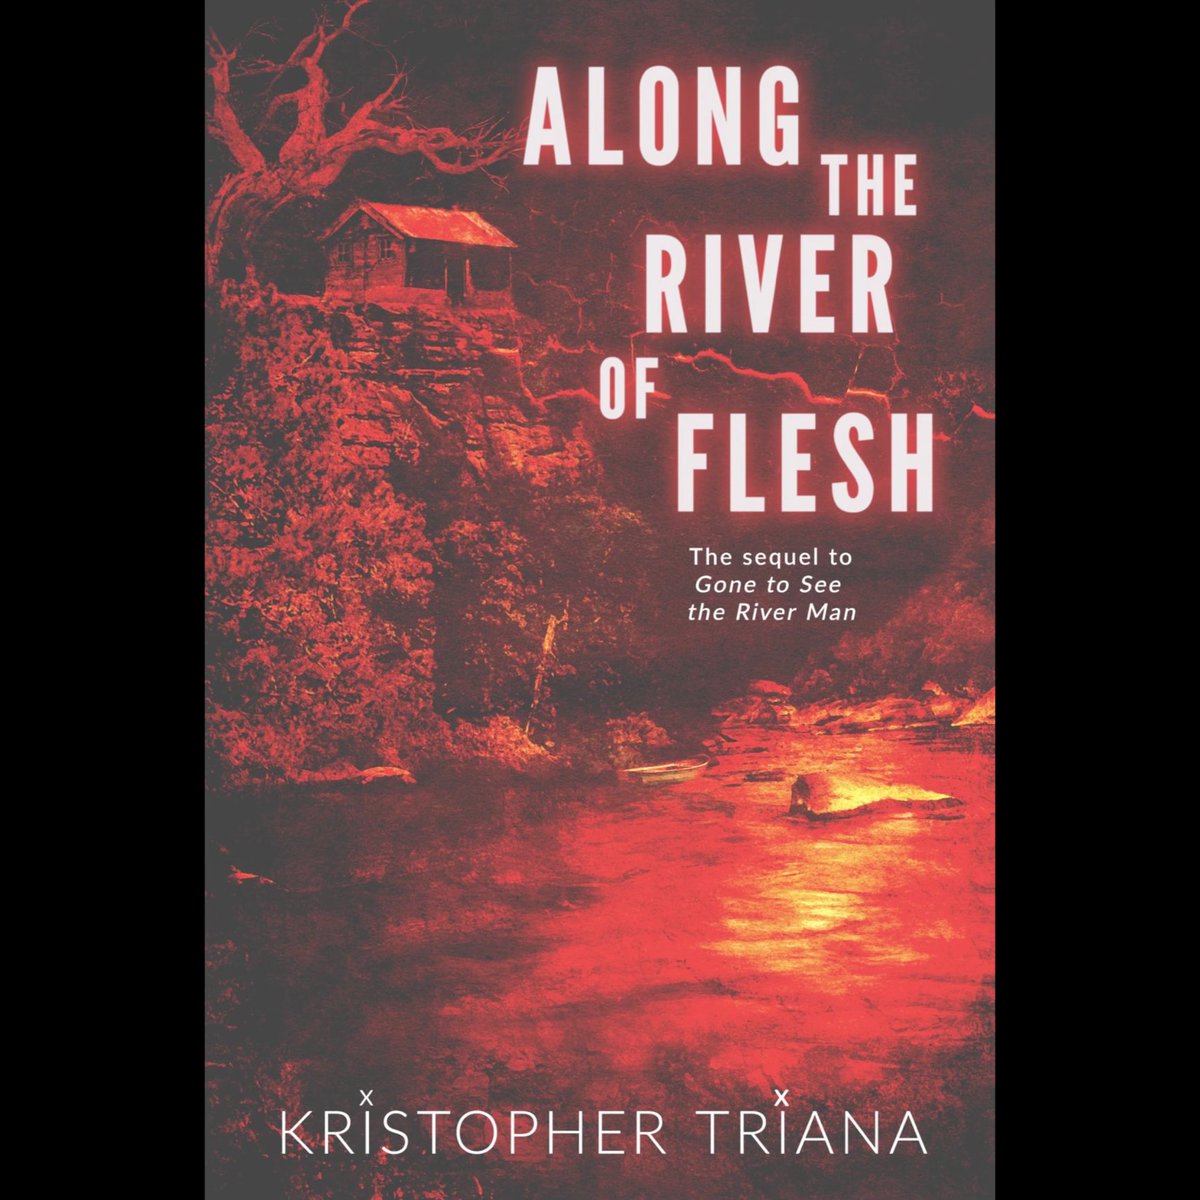 HAPPY RELEASE DAY! My new novel ALONG THE RIVER OF FLESH is now available everywhere in paperback and ebook. You can also get the signed hardback from my site. Are you ready to return to the river? #kristophertriana #readkristophertriana #trianahorror